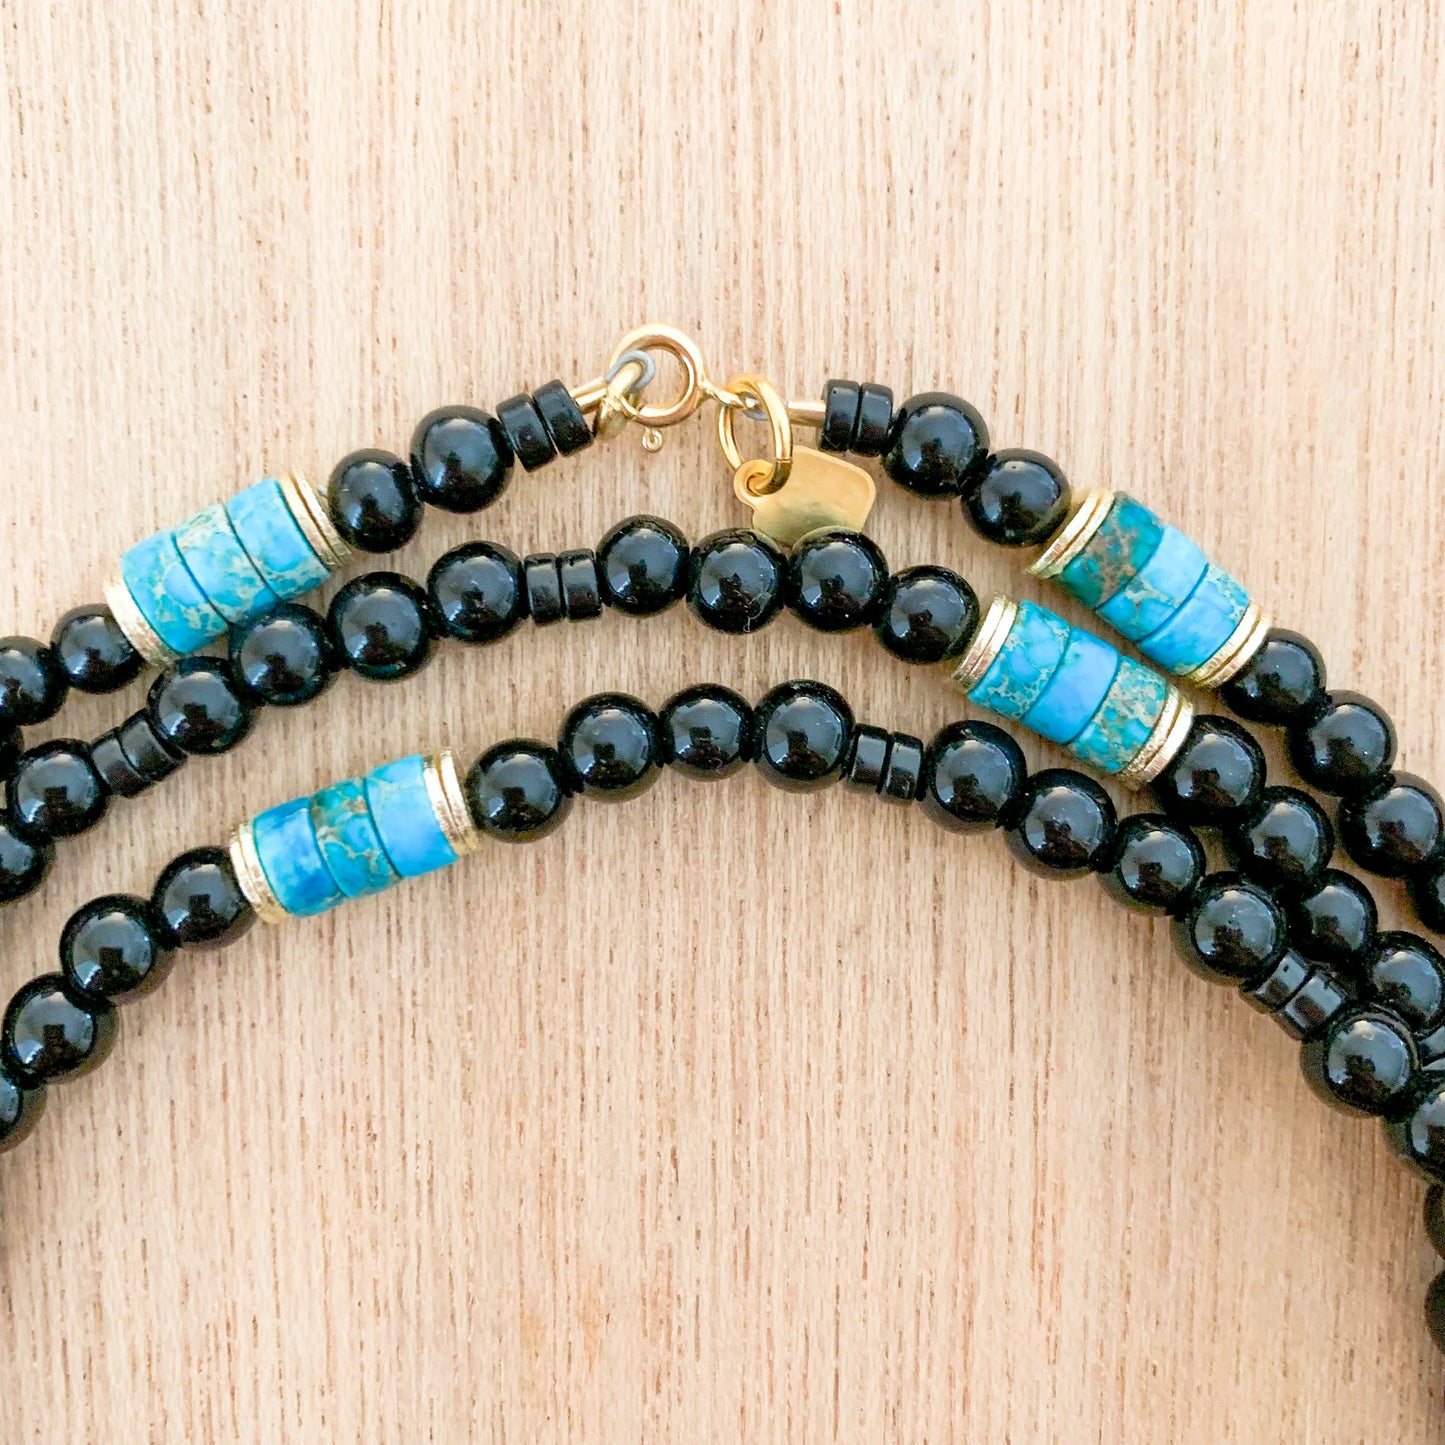 Delicate Black and Turquoise Necklace